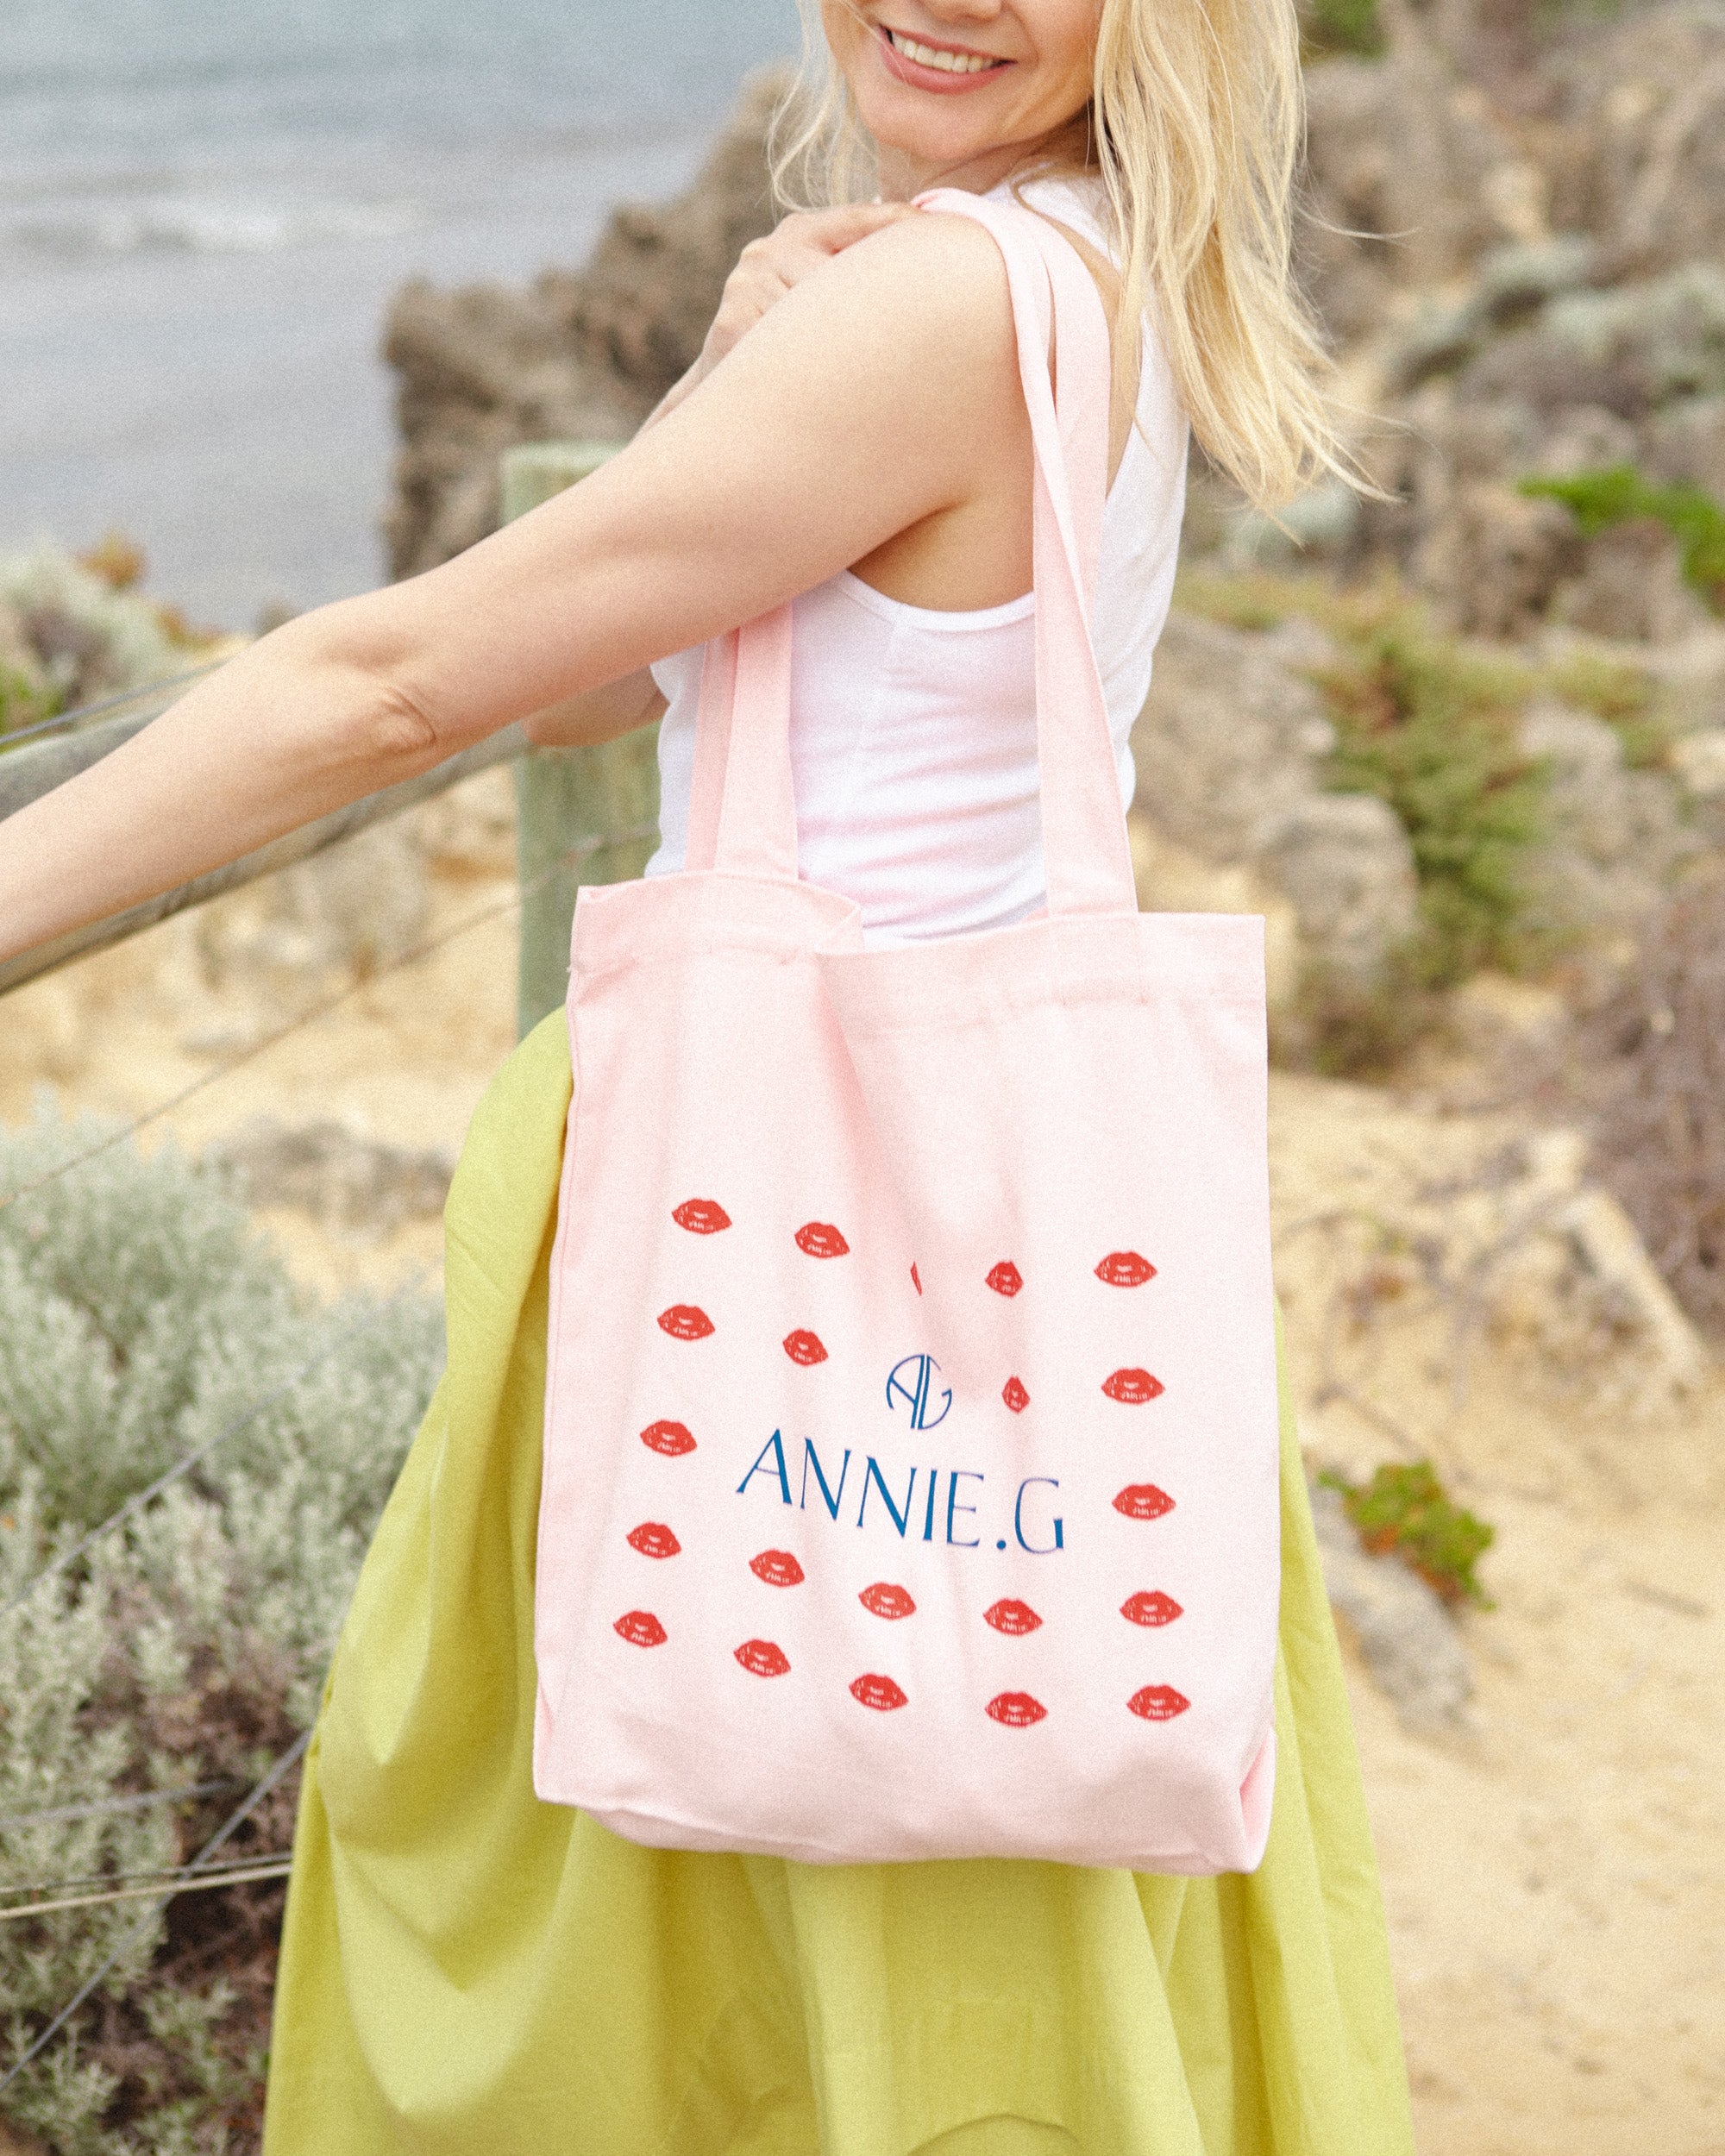 ANNIE_G-pink-with-small-red-lips-graphic-branded-cotton-canvas-tote-bag-on-girls-shoulder-at-the-beach